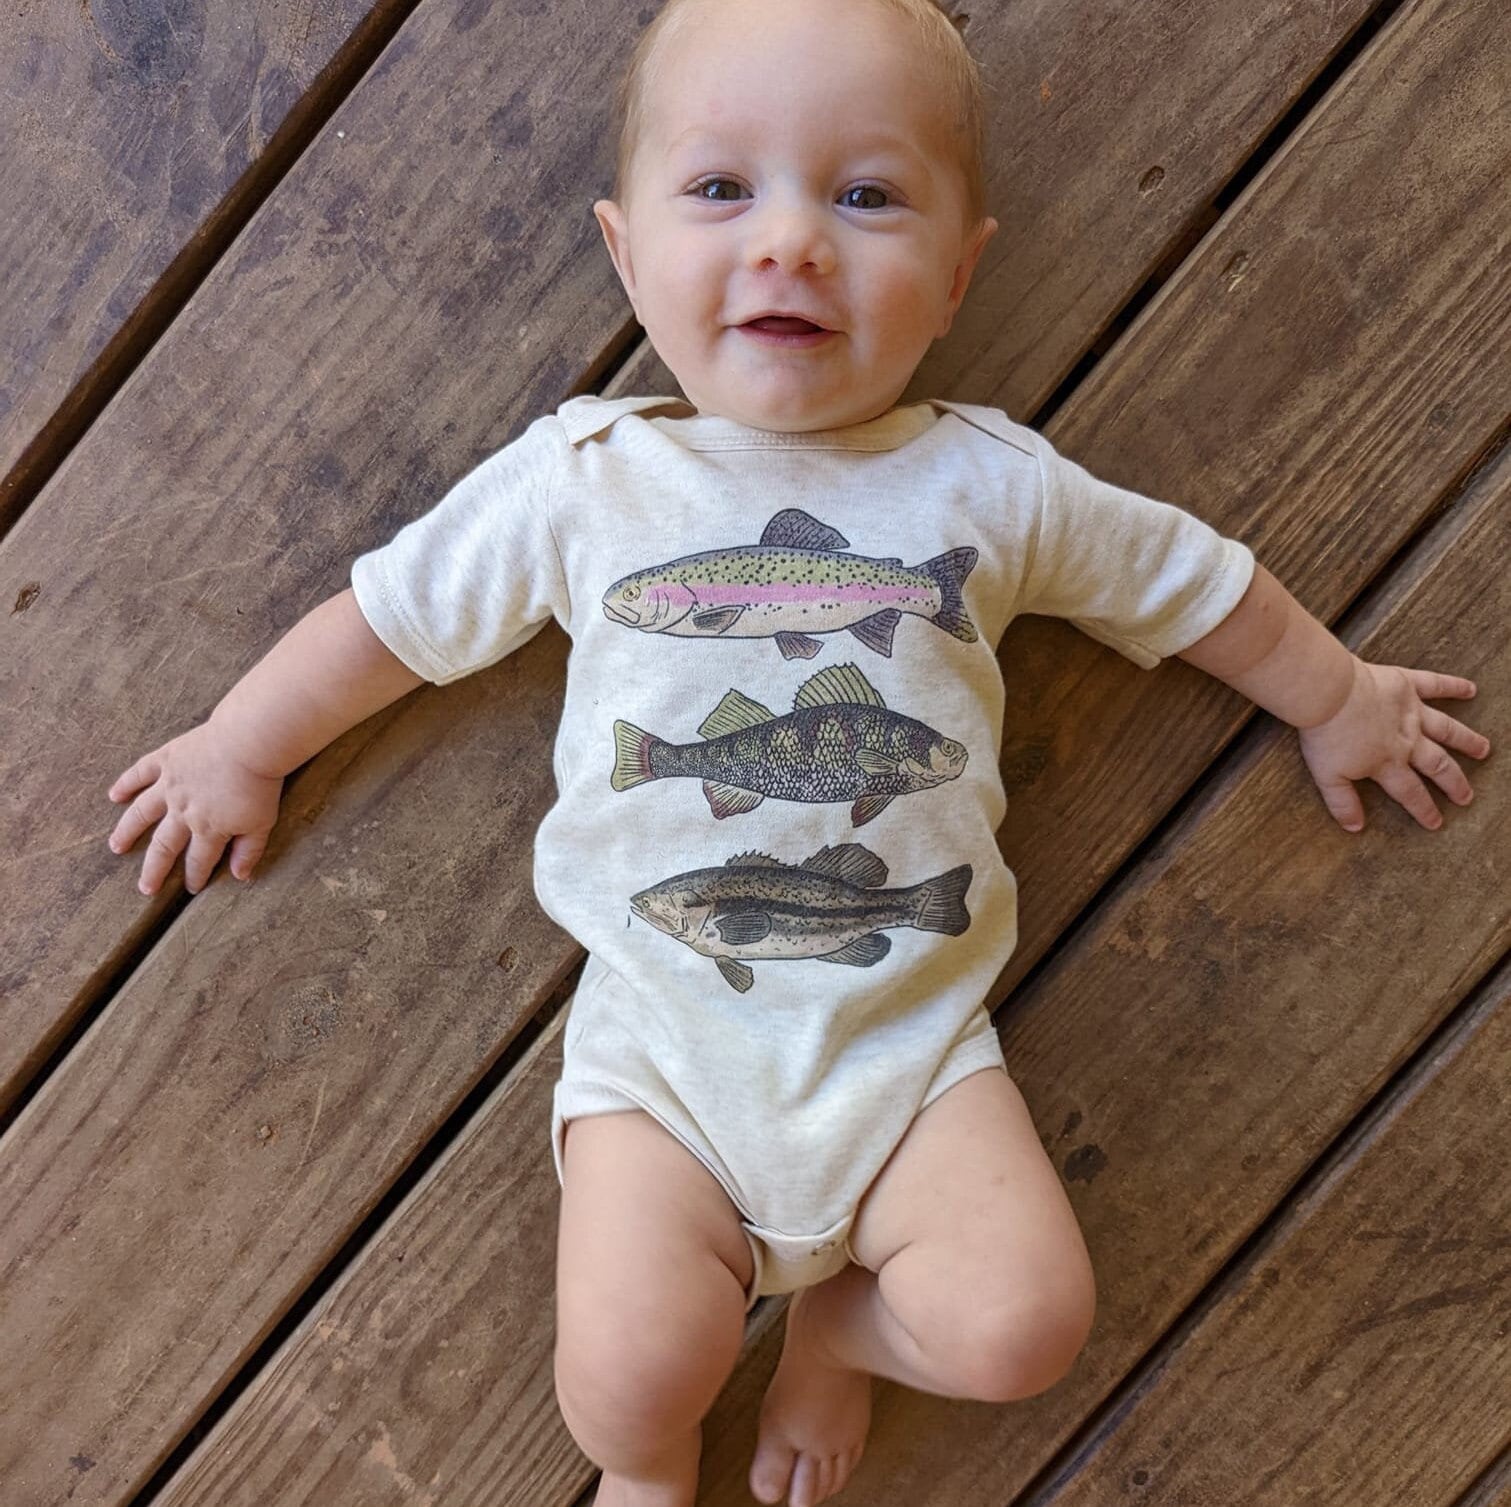 Three Fish Body Suit, Summer Fishing Outfit, Outdoor Summer